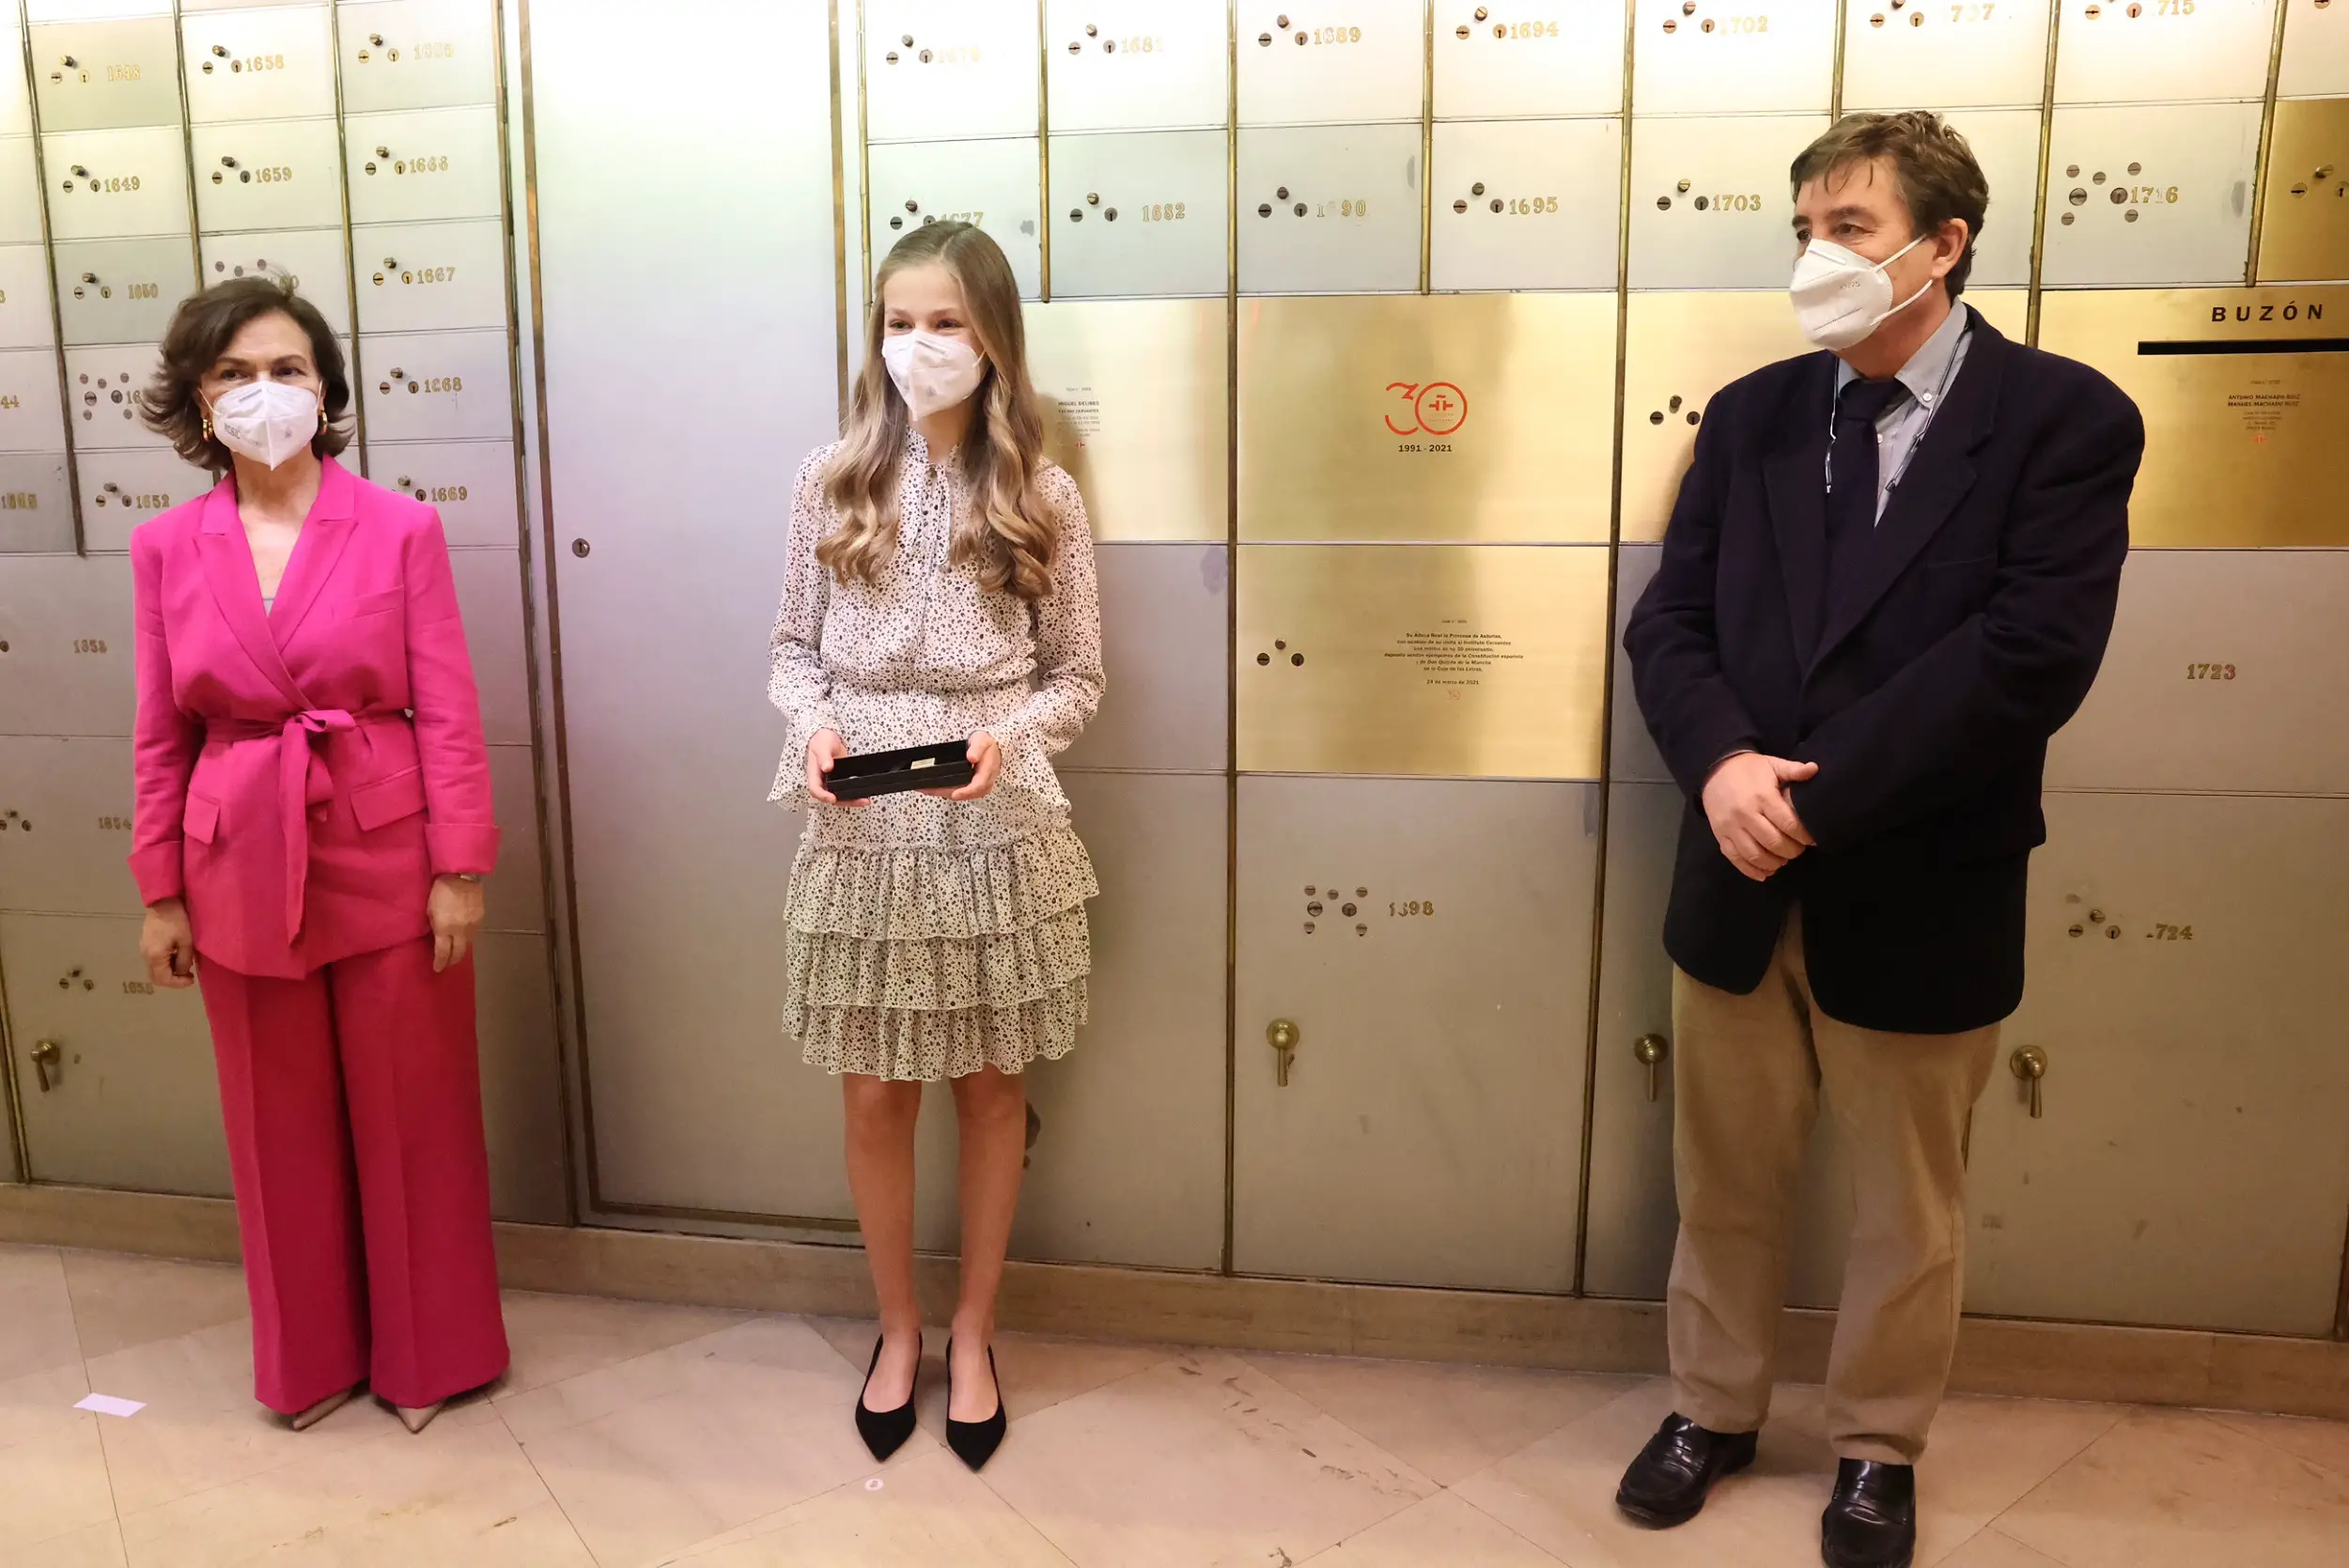 Princess Leonor of Spain visited the headquarters of the Cervantes Institute to mark its 30th anniversary